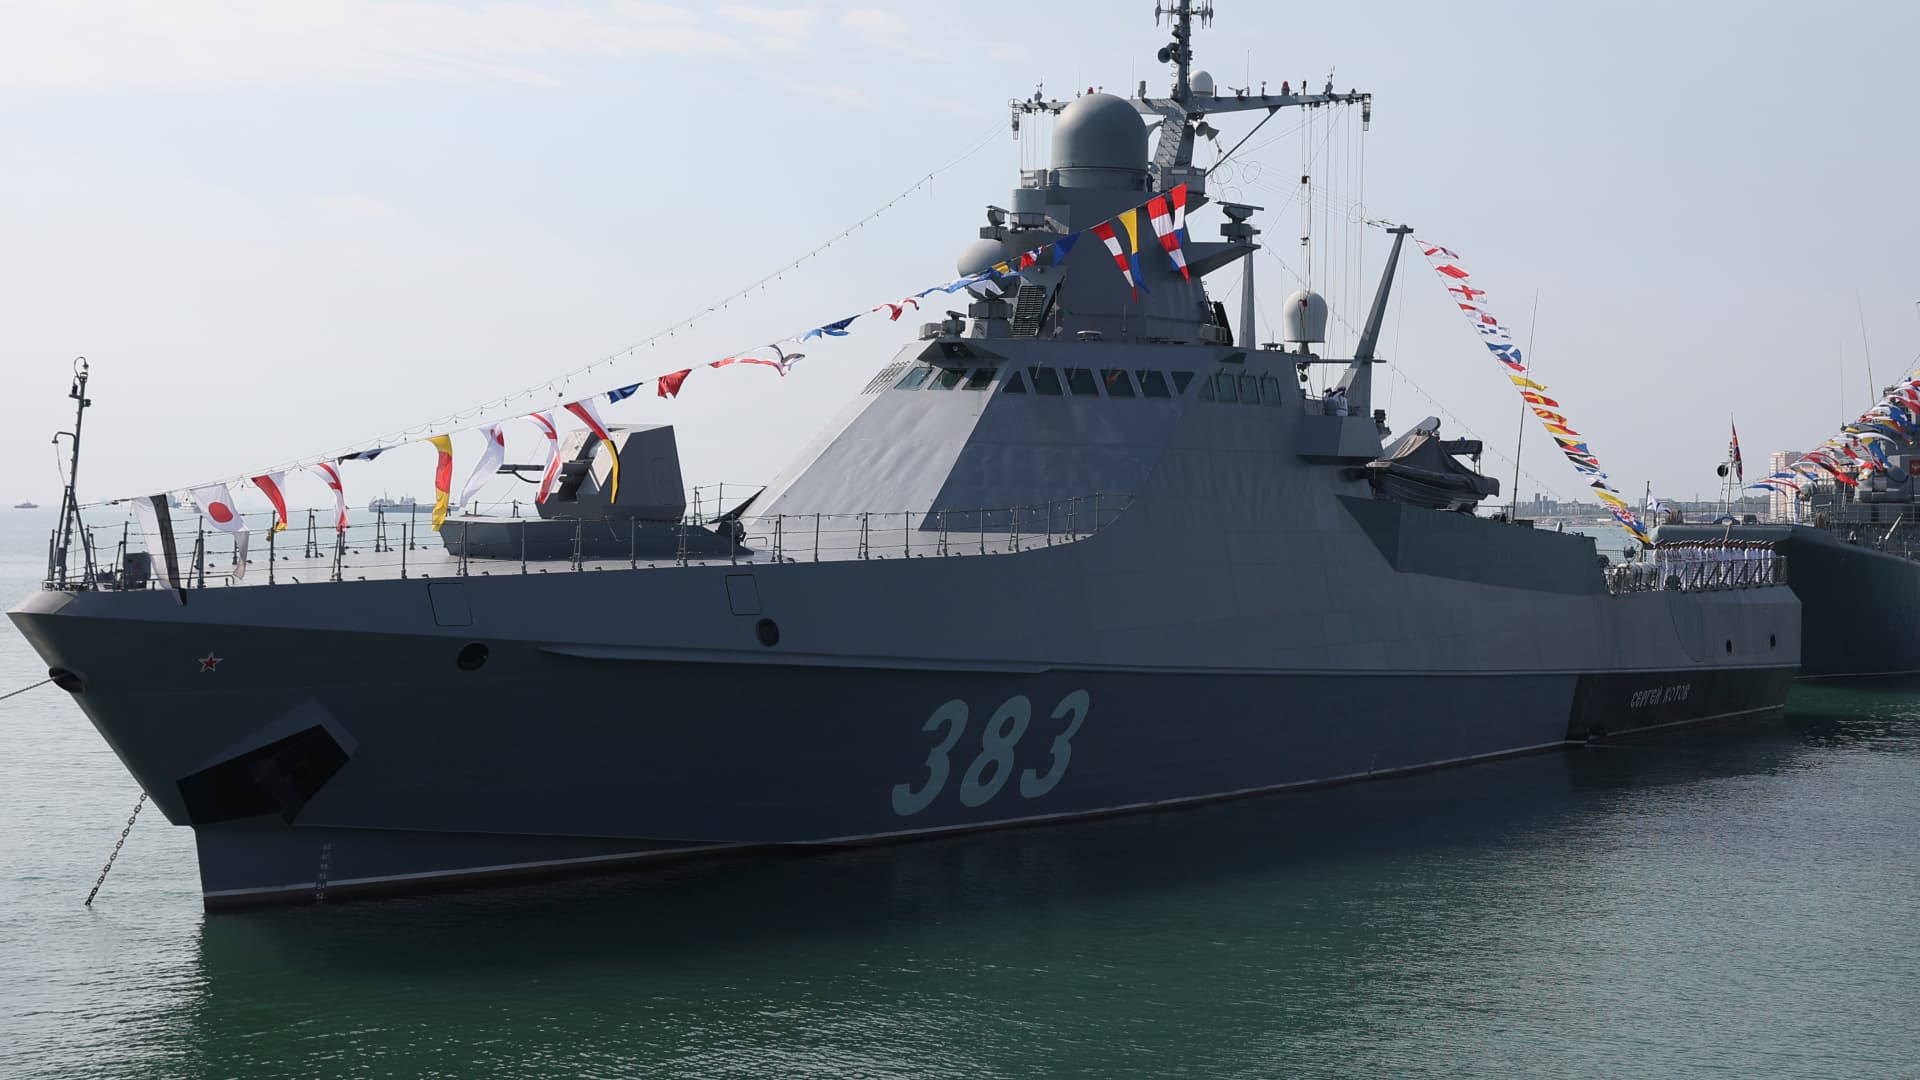 The Sergey Kotov patrol ship takes part in a Navy Day parade, in Novorossiysk, Russia.